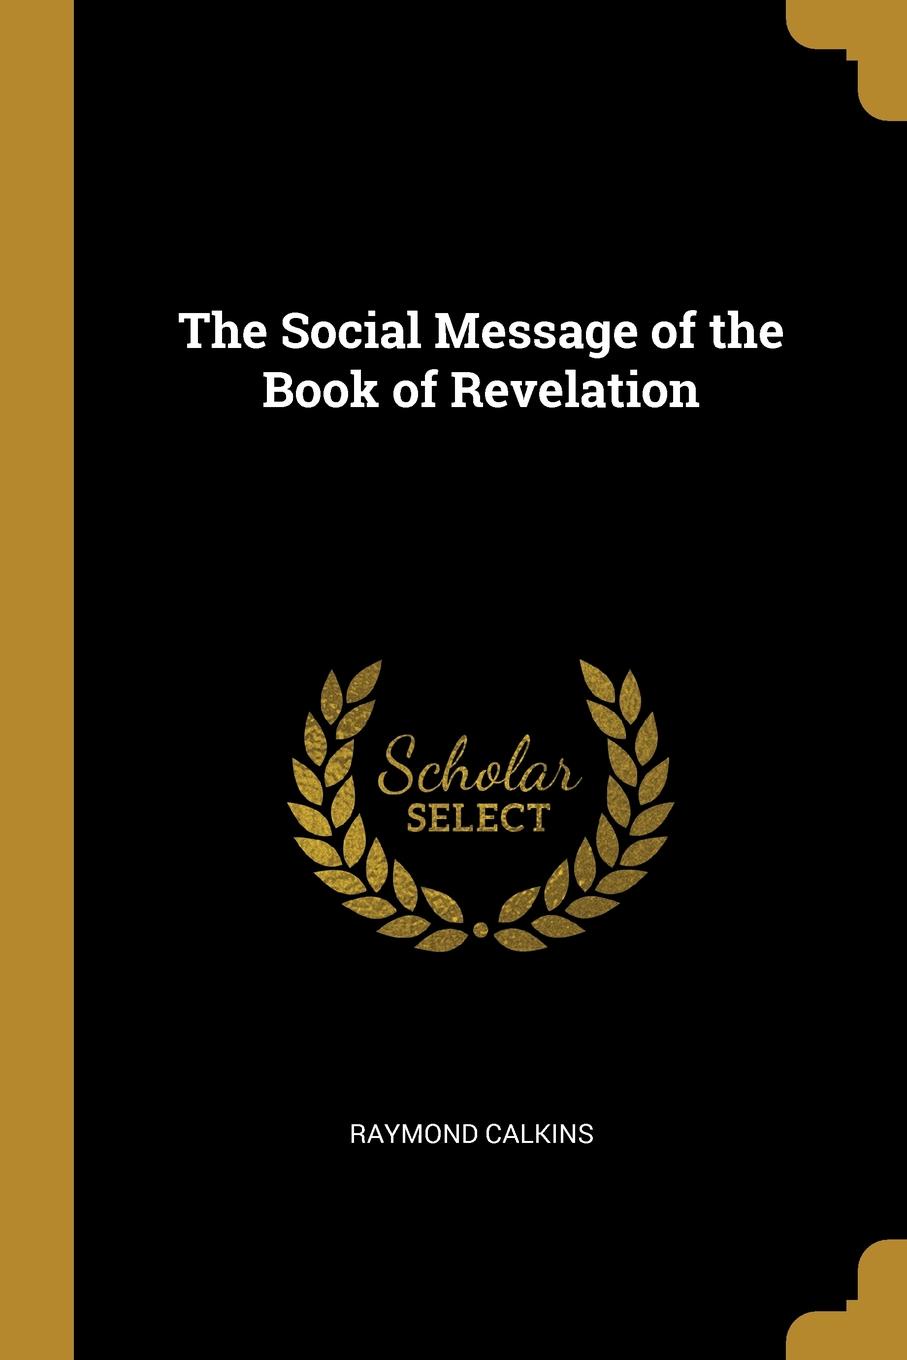 The Social Message of the Book of Revelation